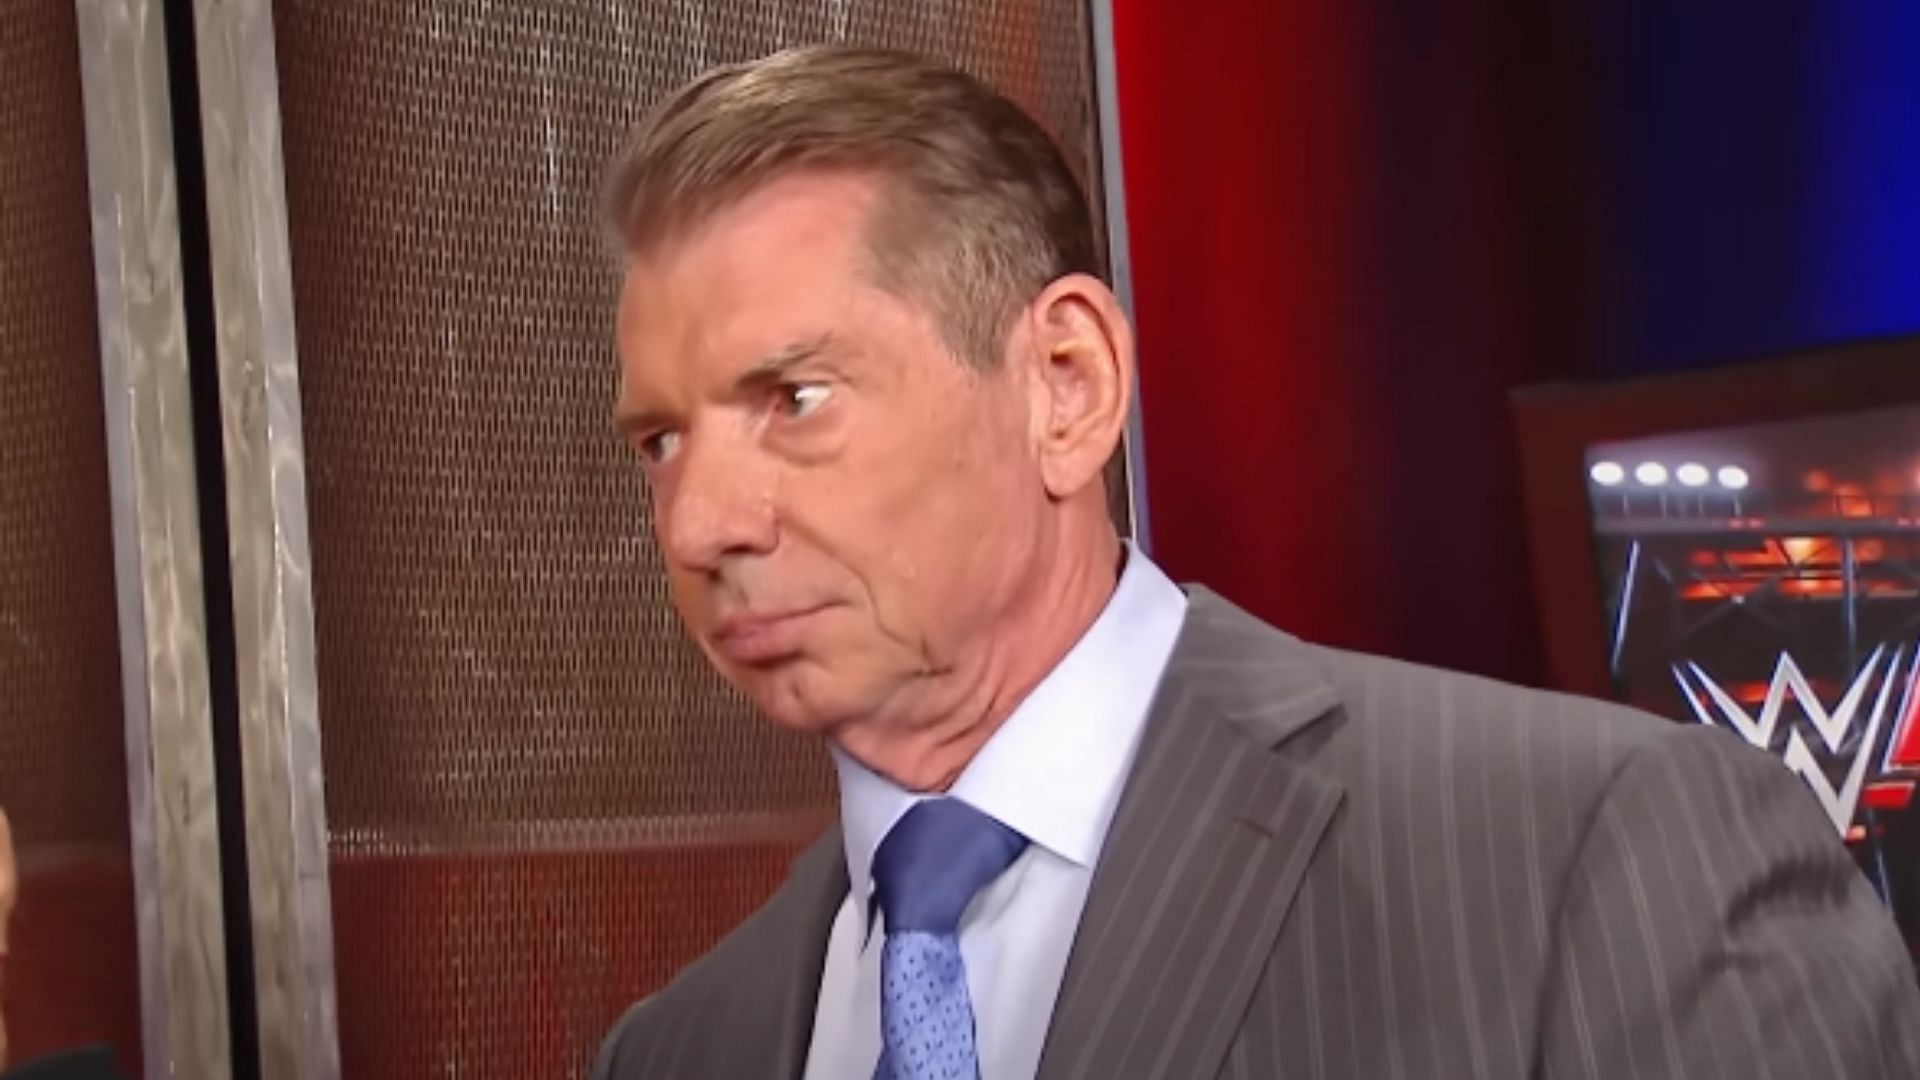 Vince McMahon is WWE&rsquo;s Chairman and CEO